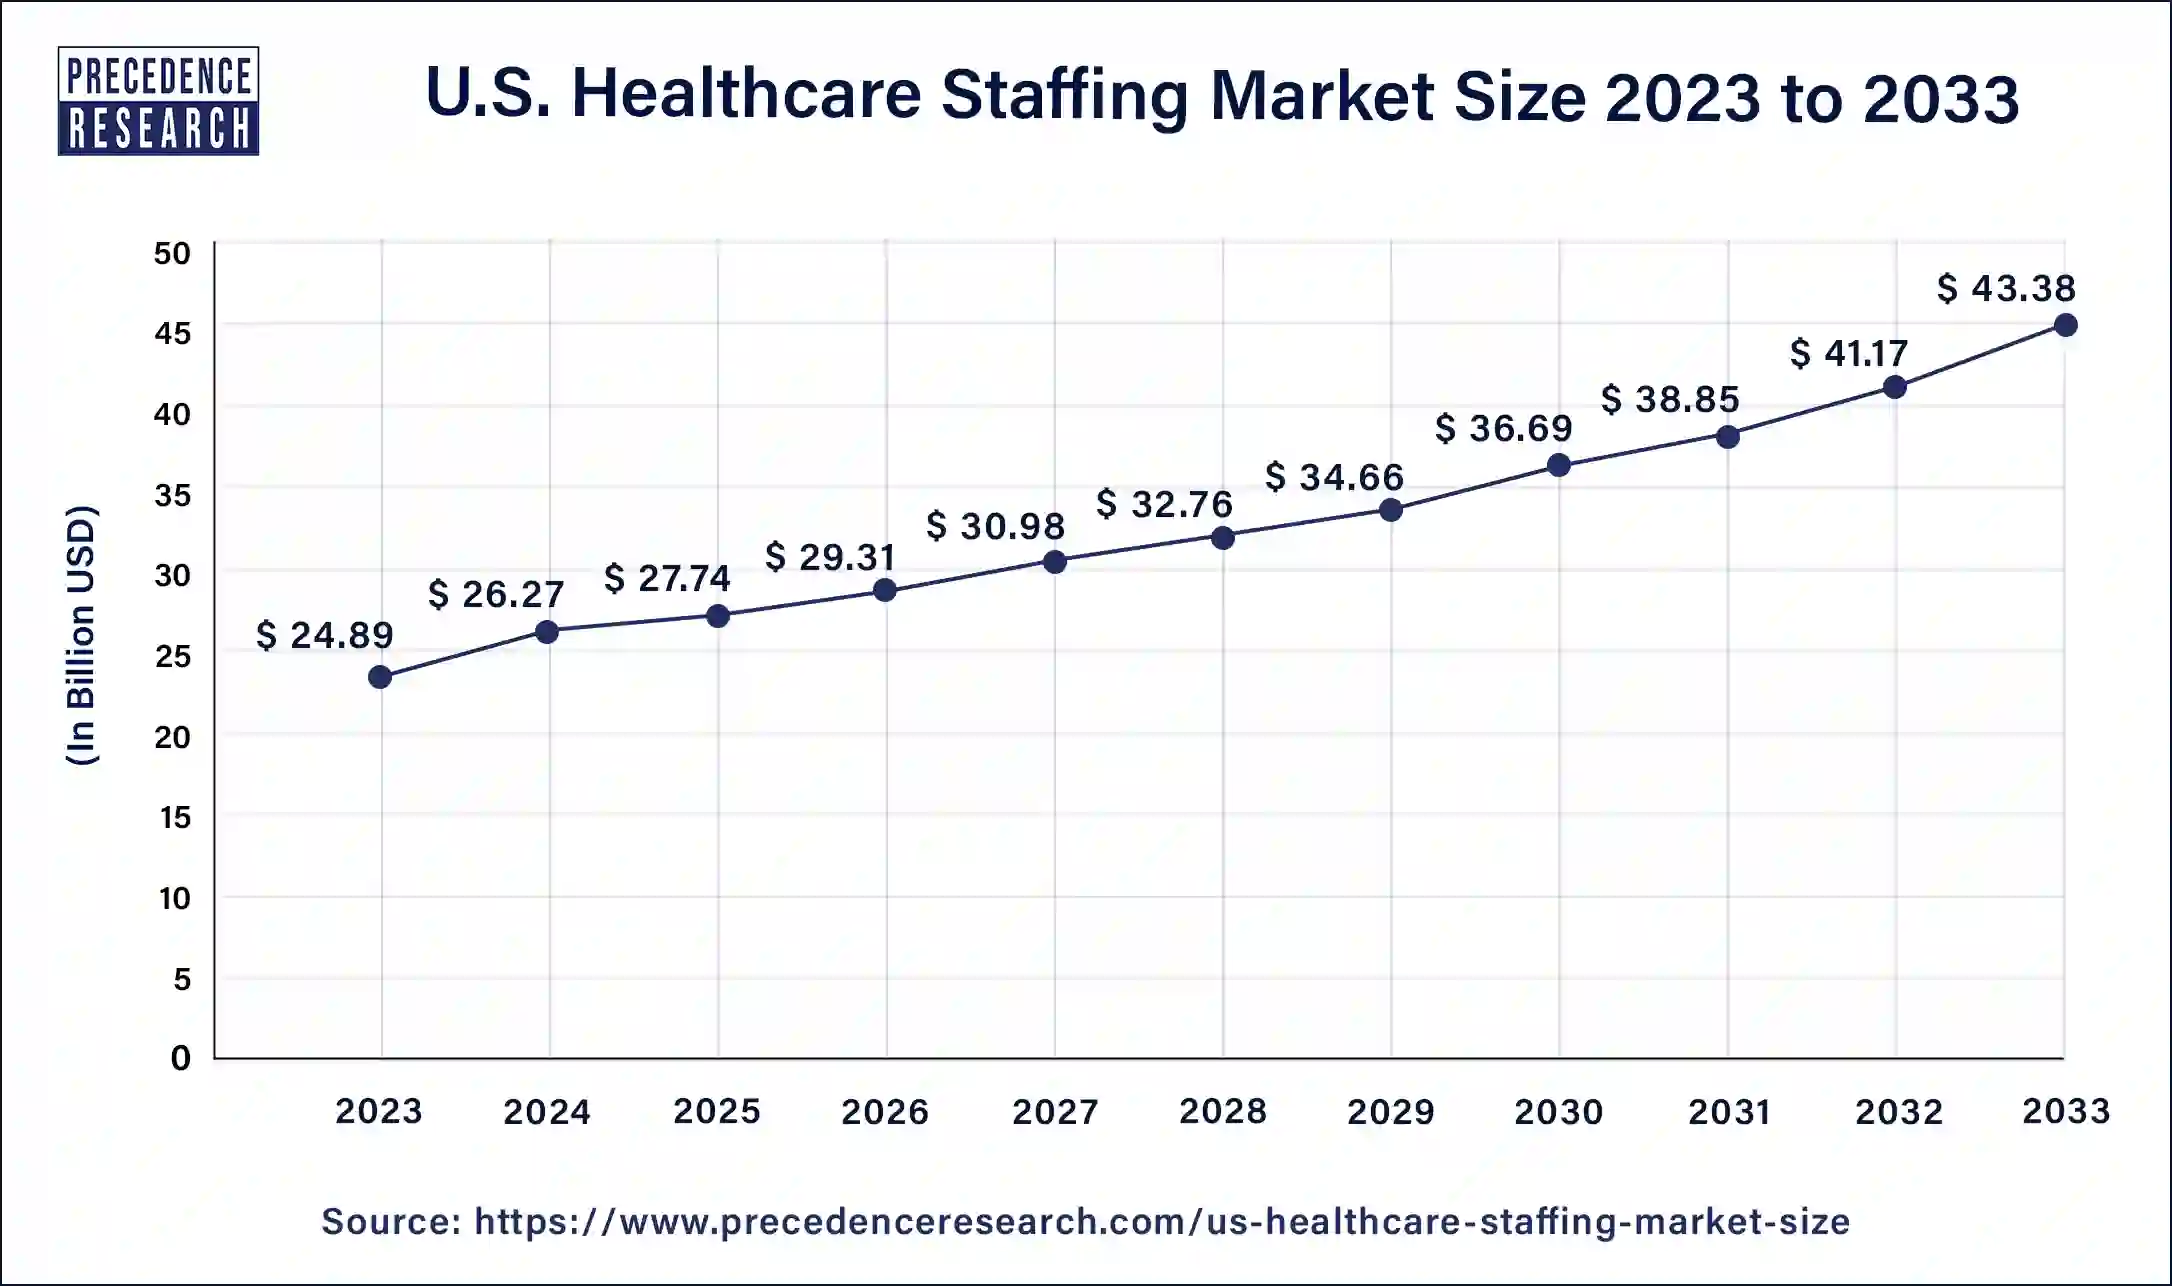 U.S. Healthcare Staffing Market Size 2024 To 2033